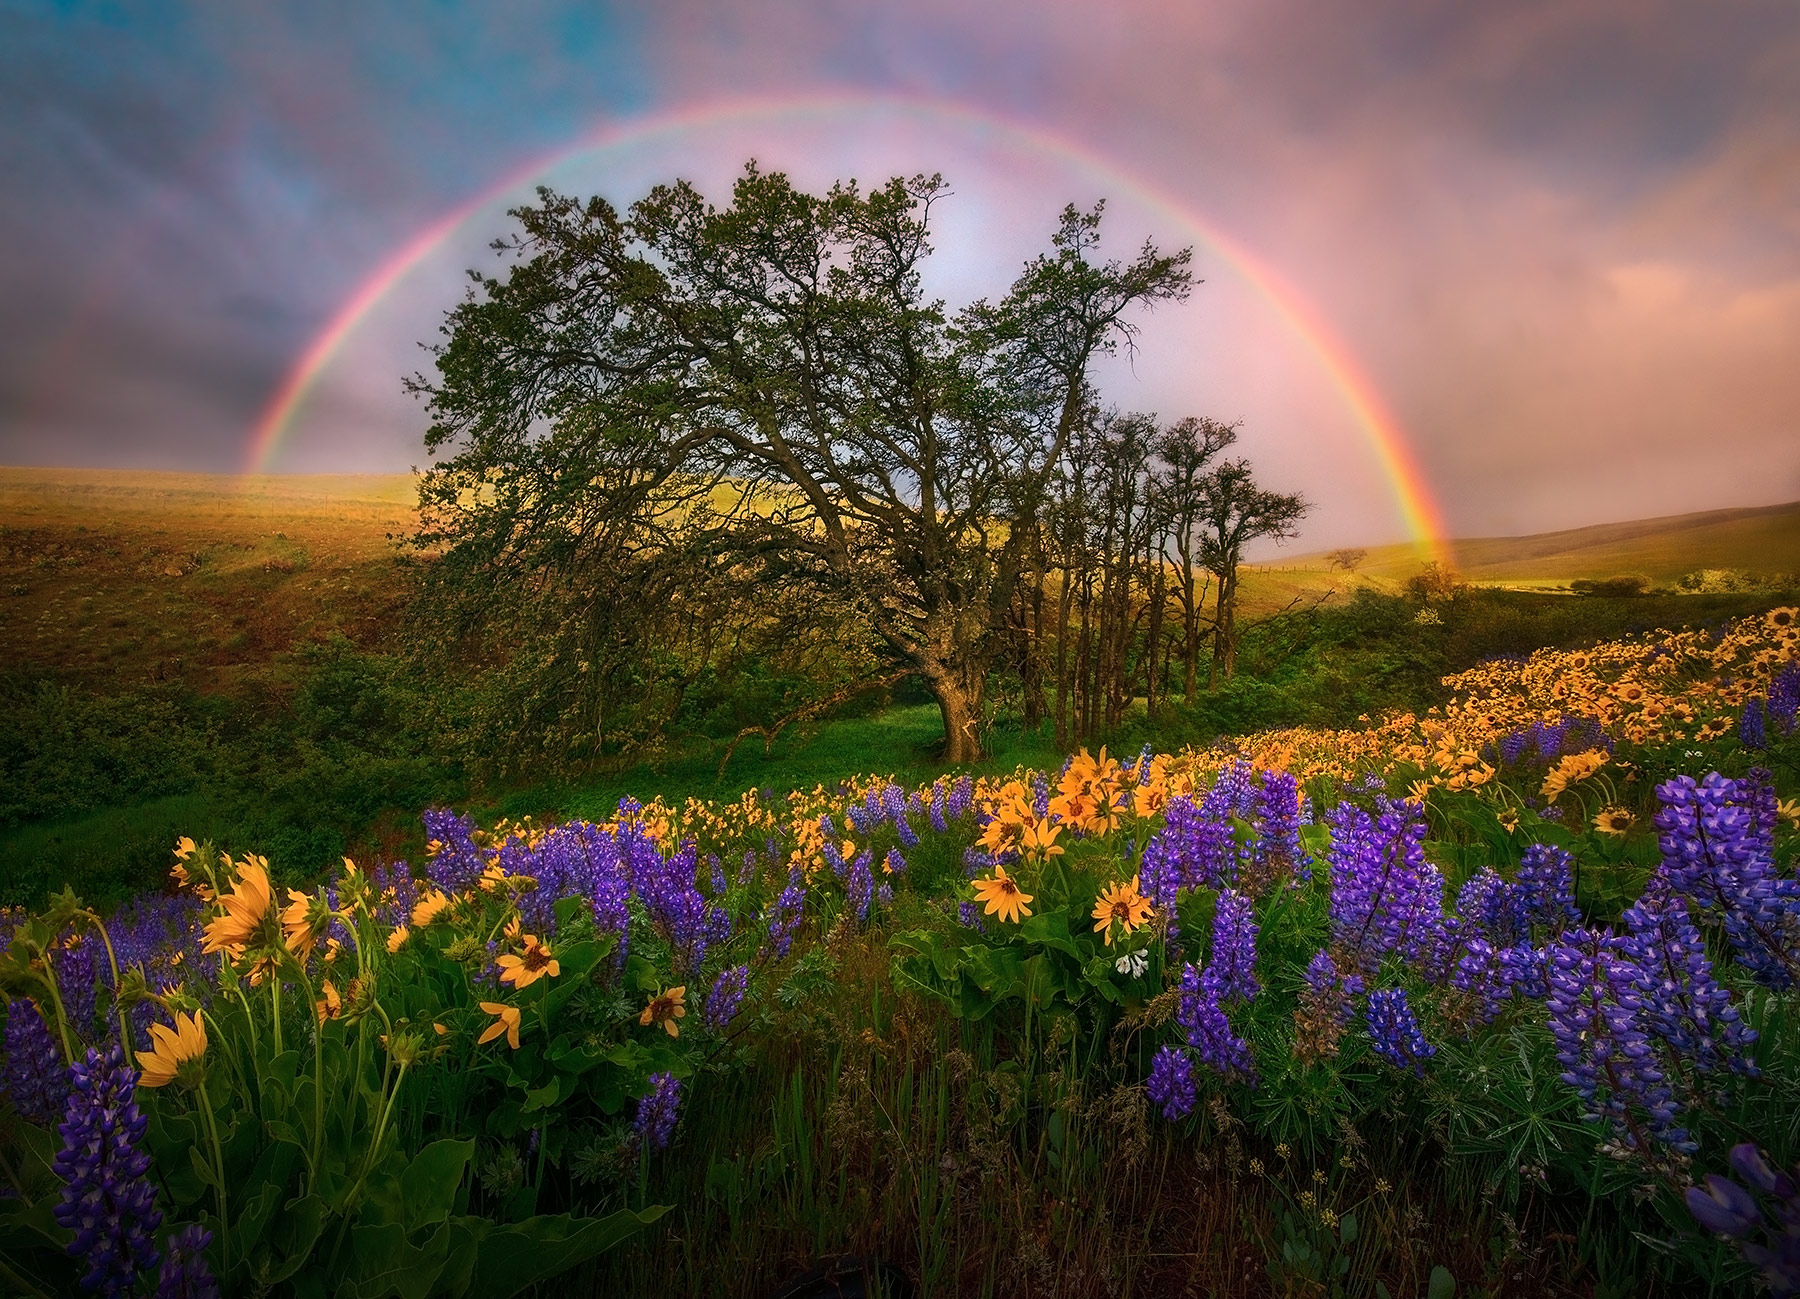 A very lucky moment of incredible light at a place I know well. &nbsp;The rainbow and spring colors went very well togther on...